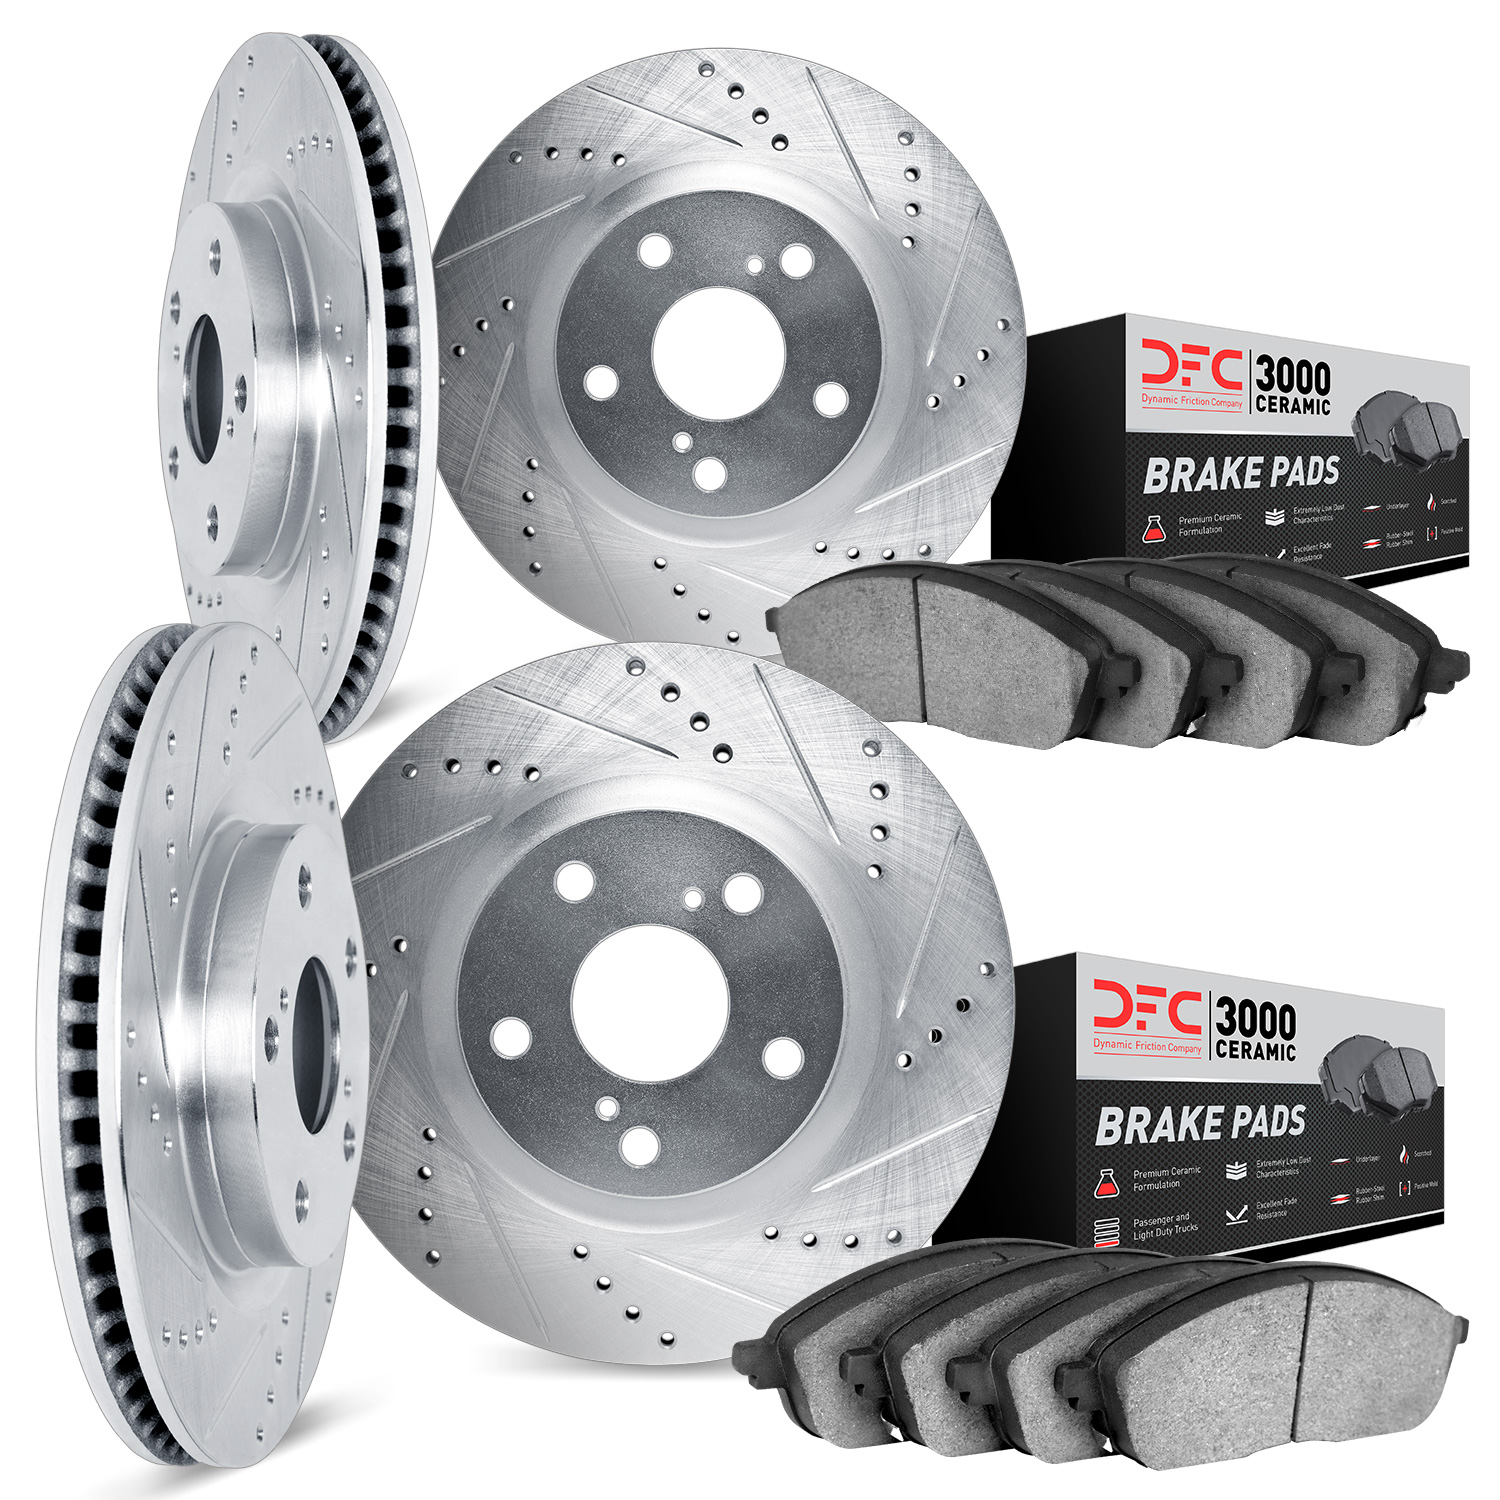 7304-67056 Drilled/Slotted Brake Rotor with 3000-Series Ceramic Brake Pads Kit [Silver], 2003-2011 Infiniti/Nissan, Position: Fr